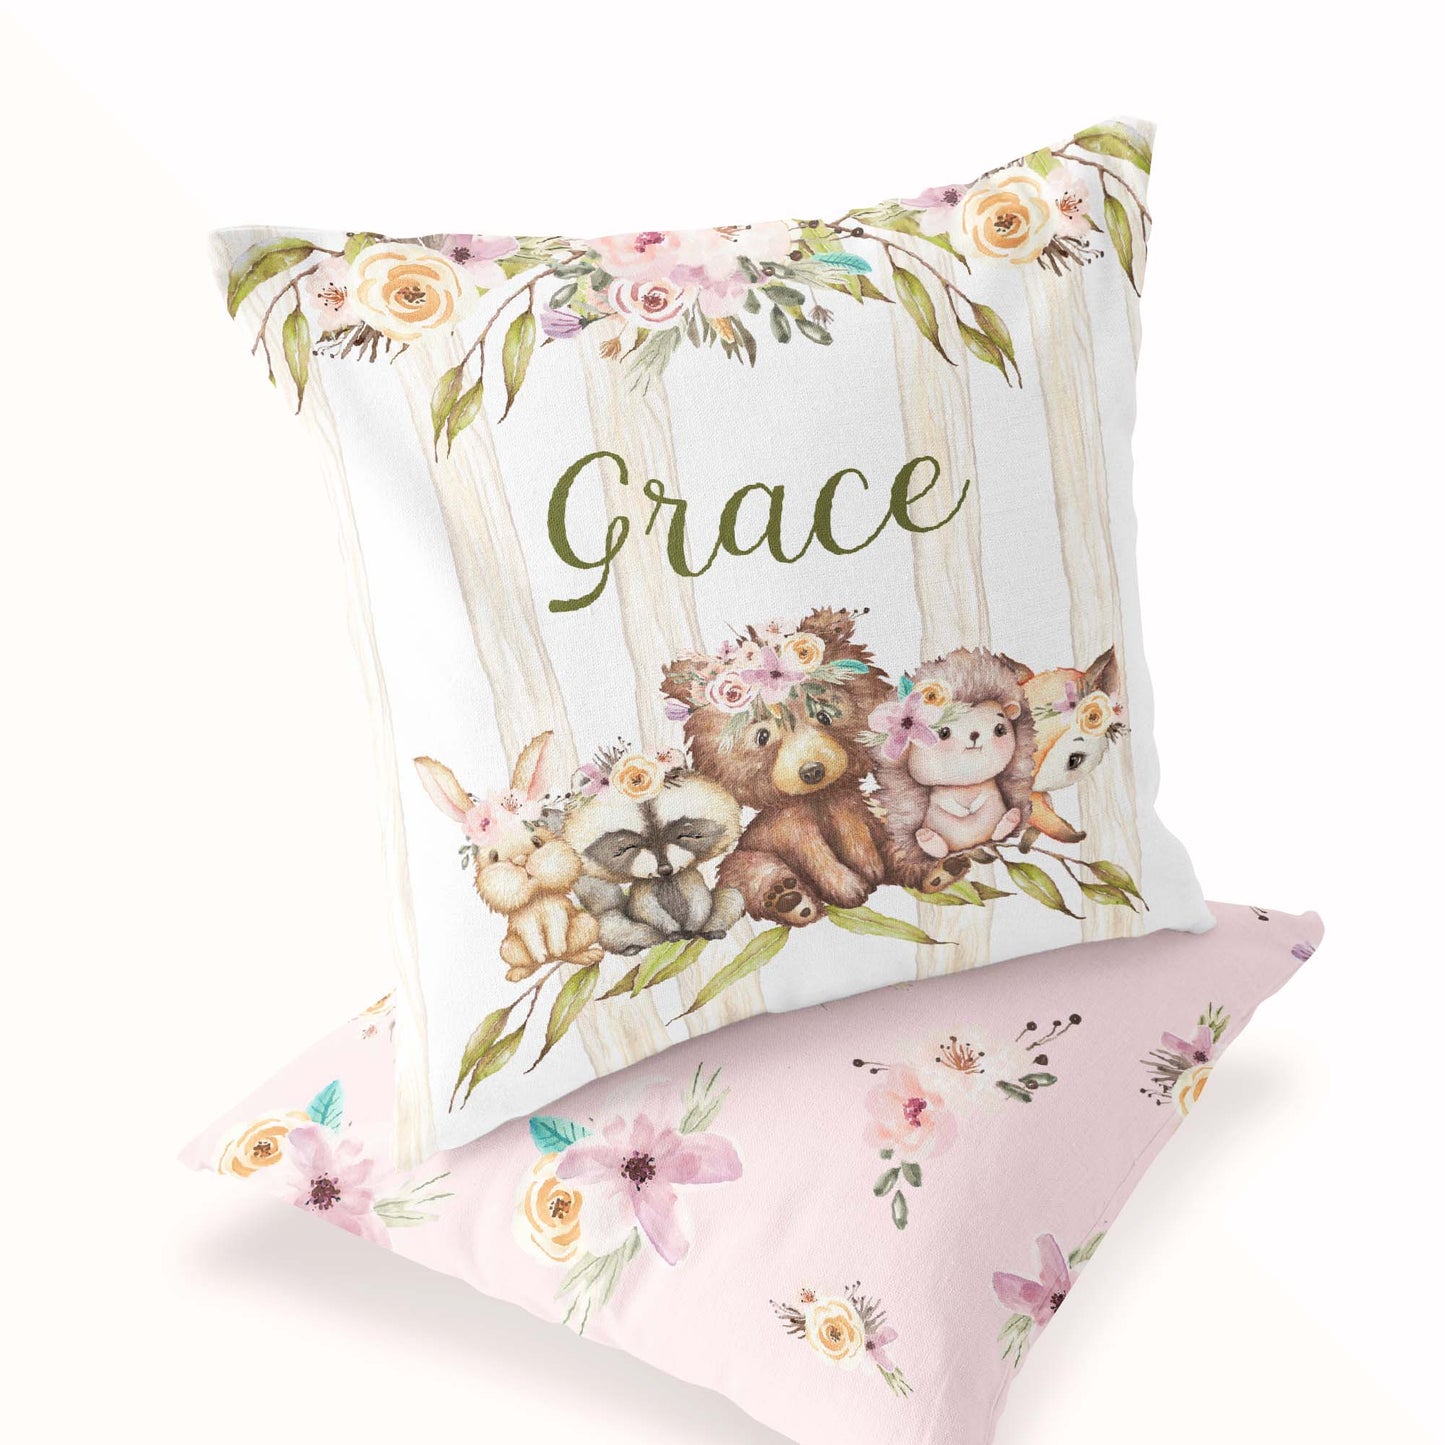 Floral Woodland Personalized Pillow, Woodland Nursery Decor - Forest Friends